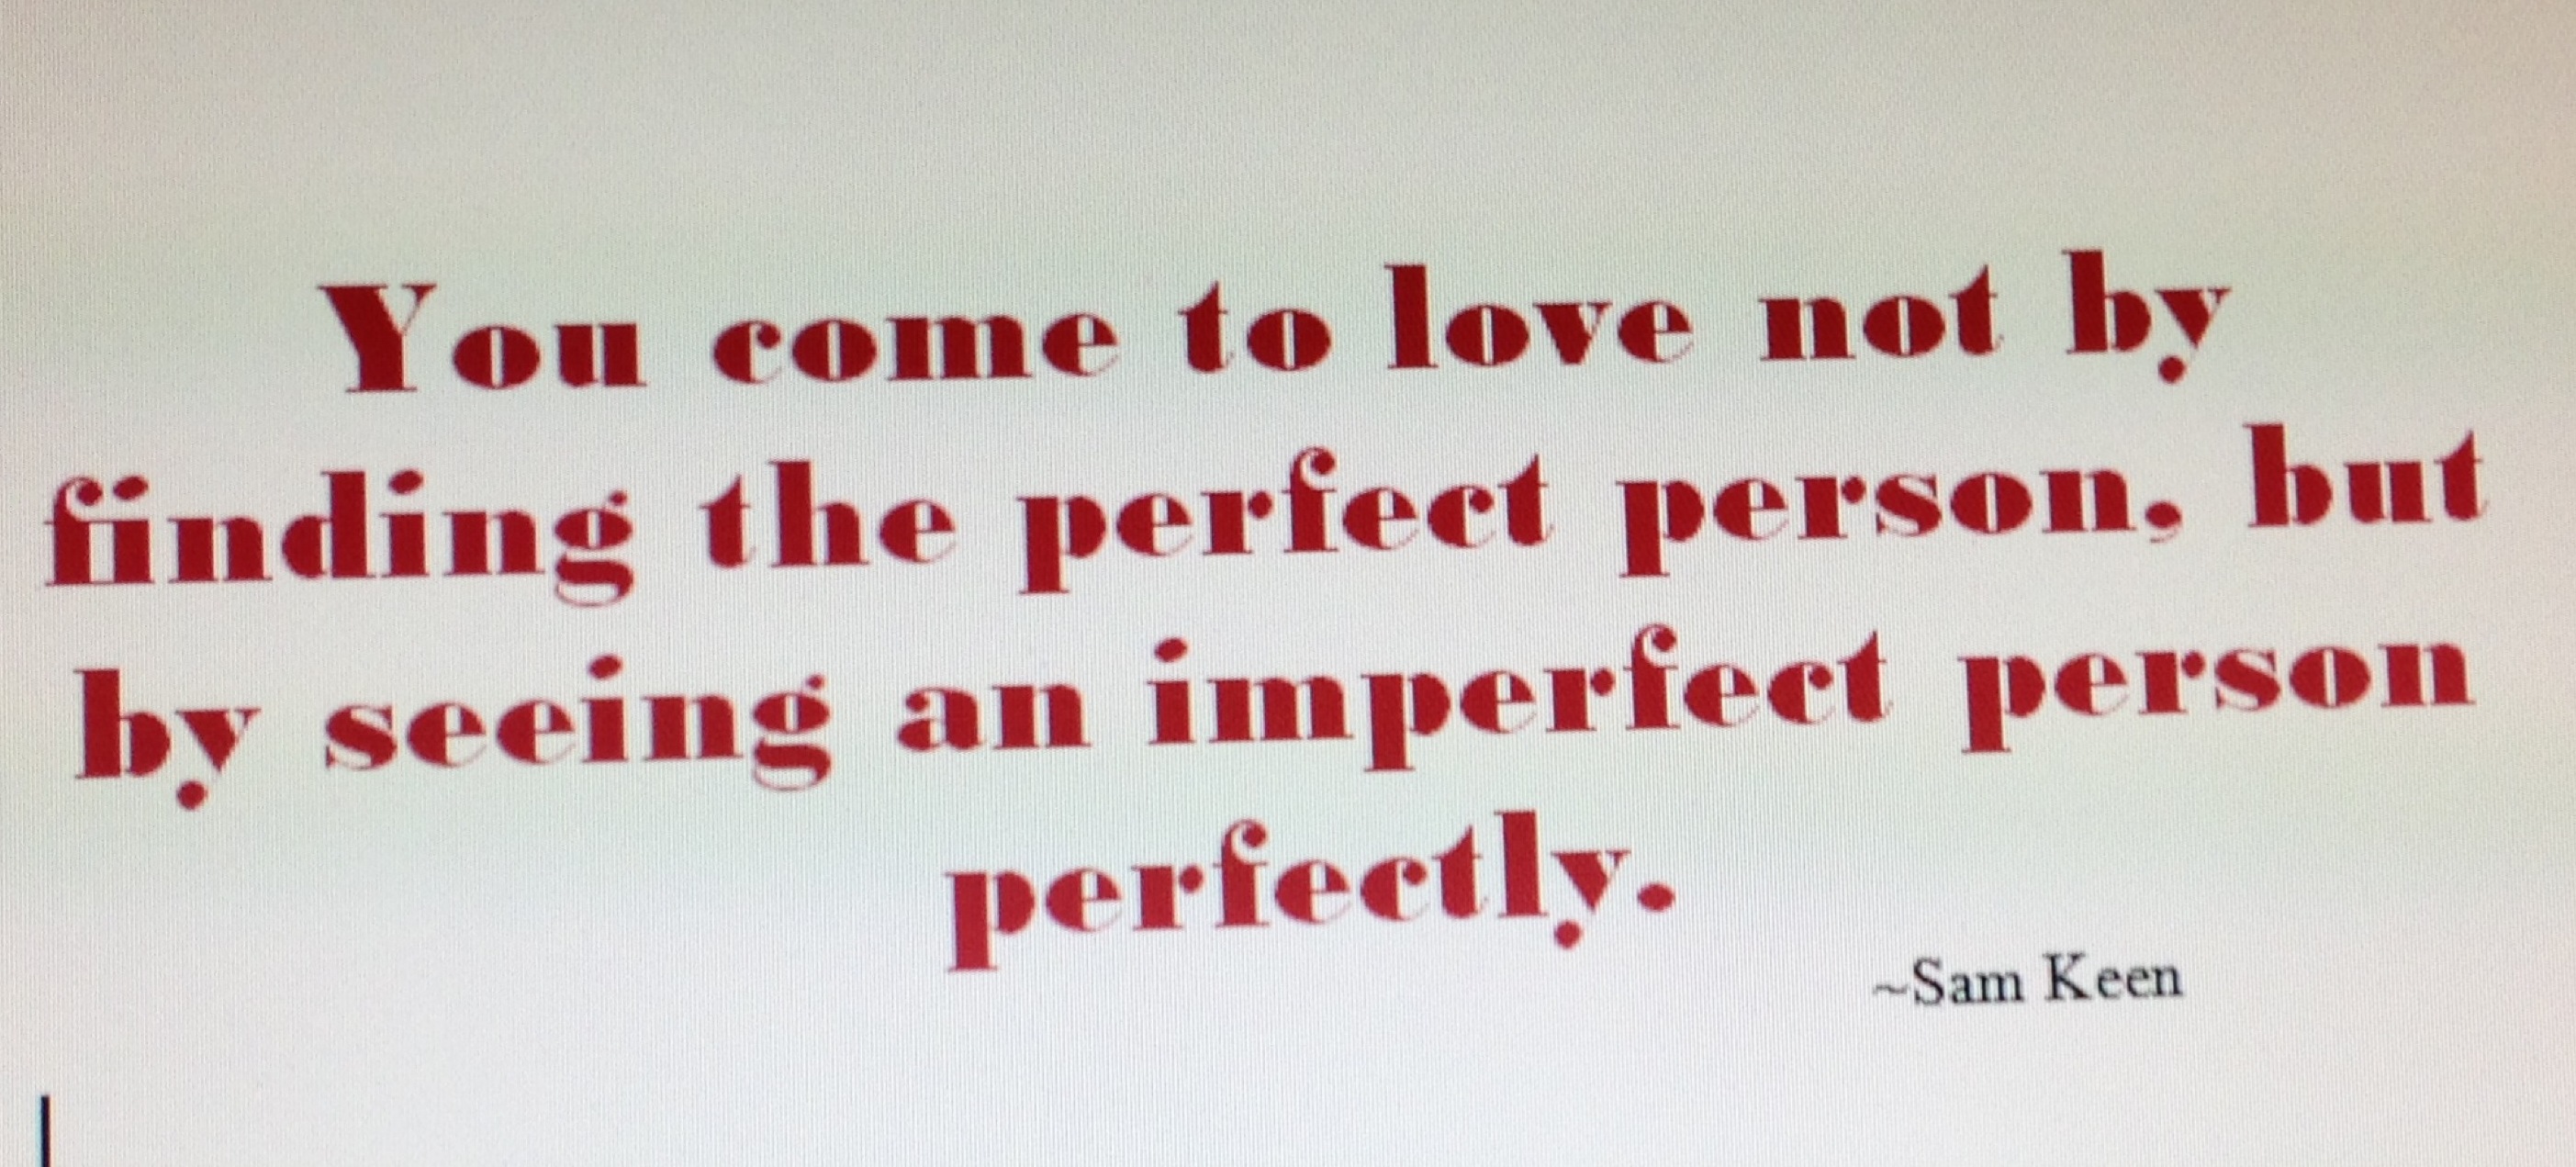 You come to love not by finding the perfect person, but by learning to see an imperfect person perfectly. Sam Keen